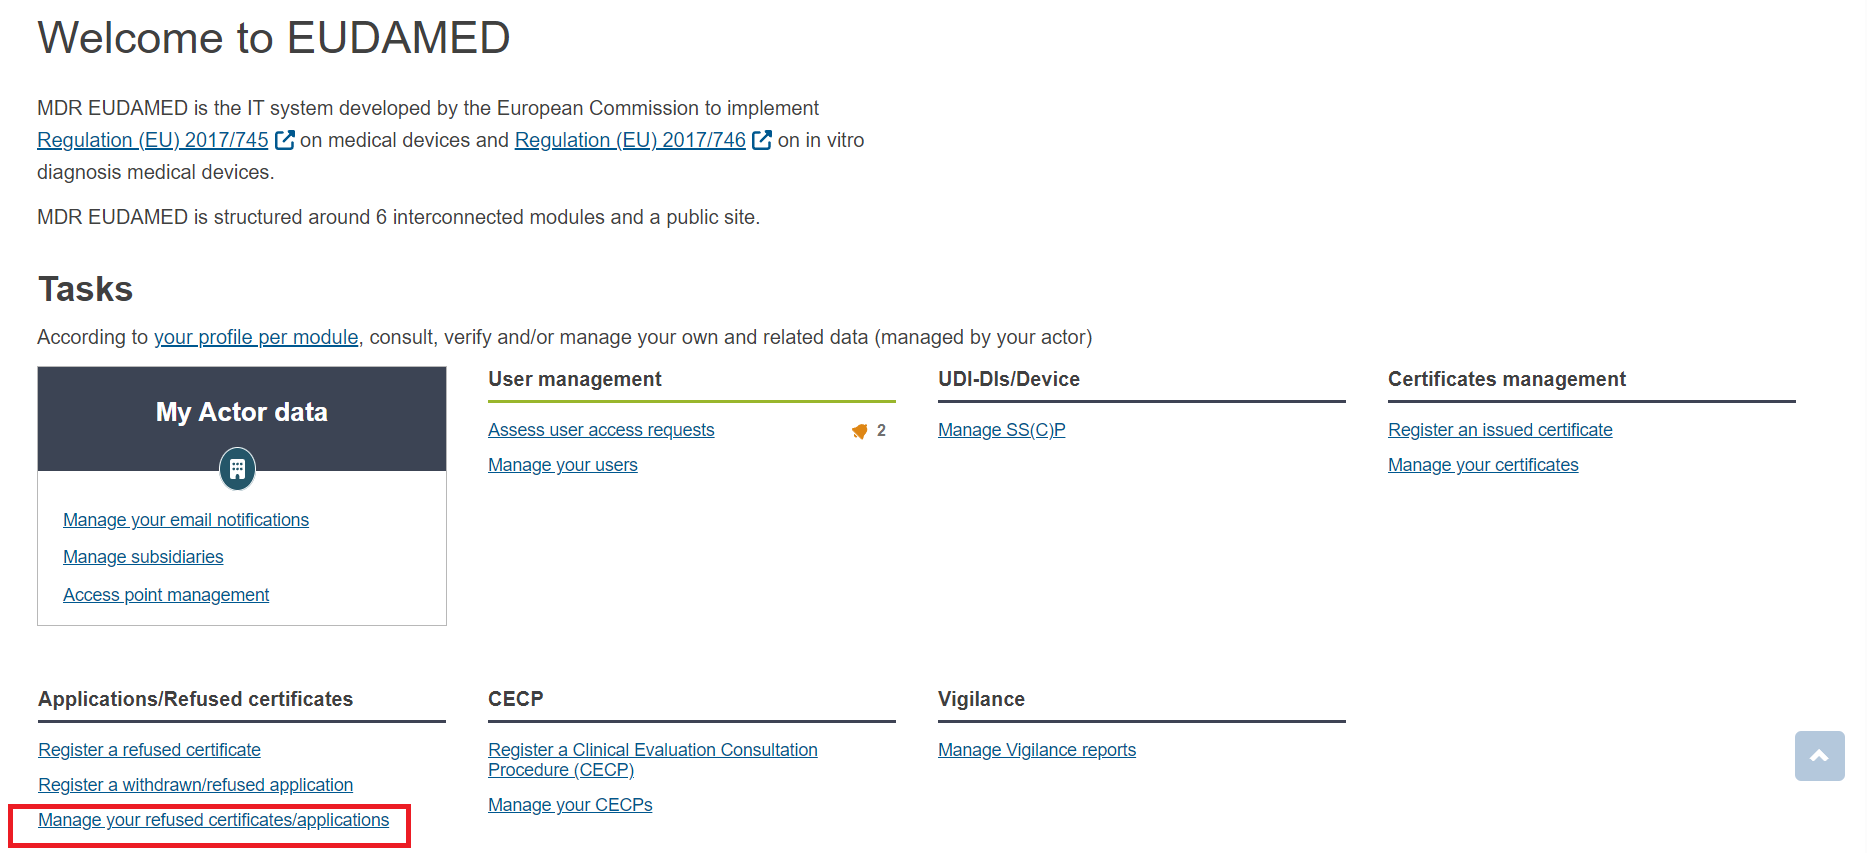 EUDAMED manage your refused certificates/applications link on the dashboard